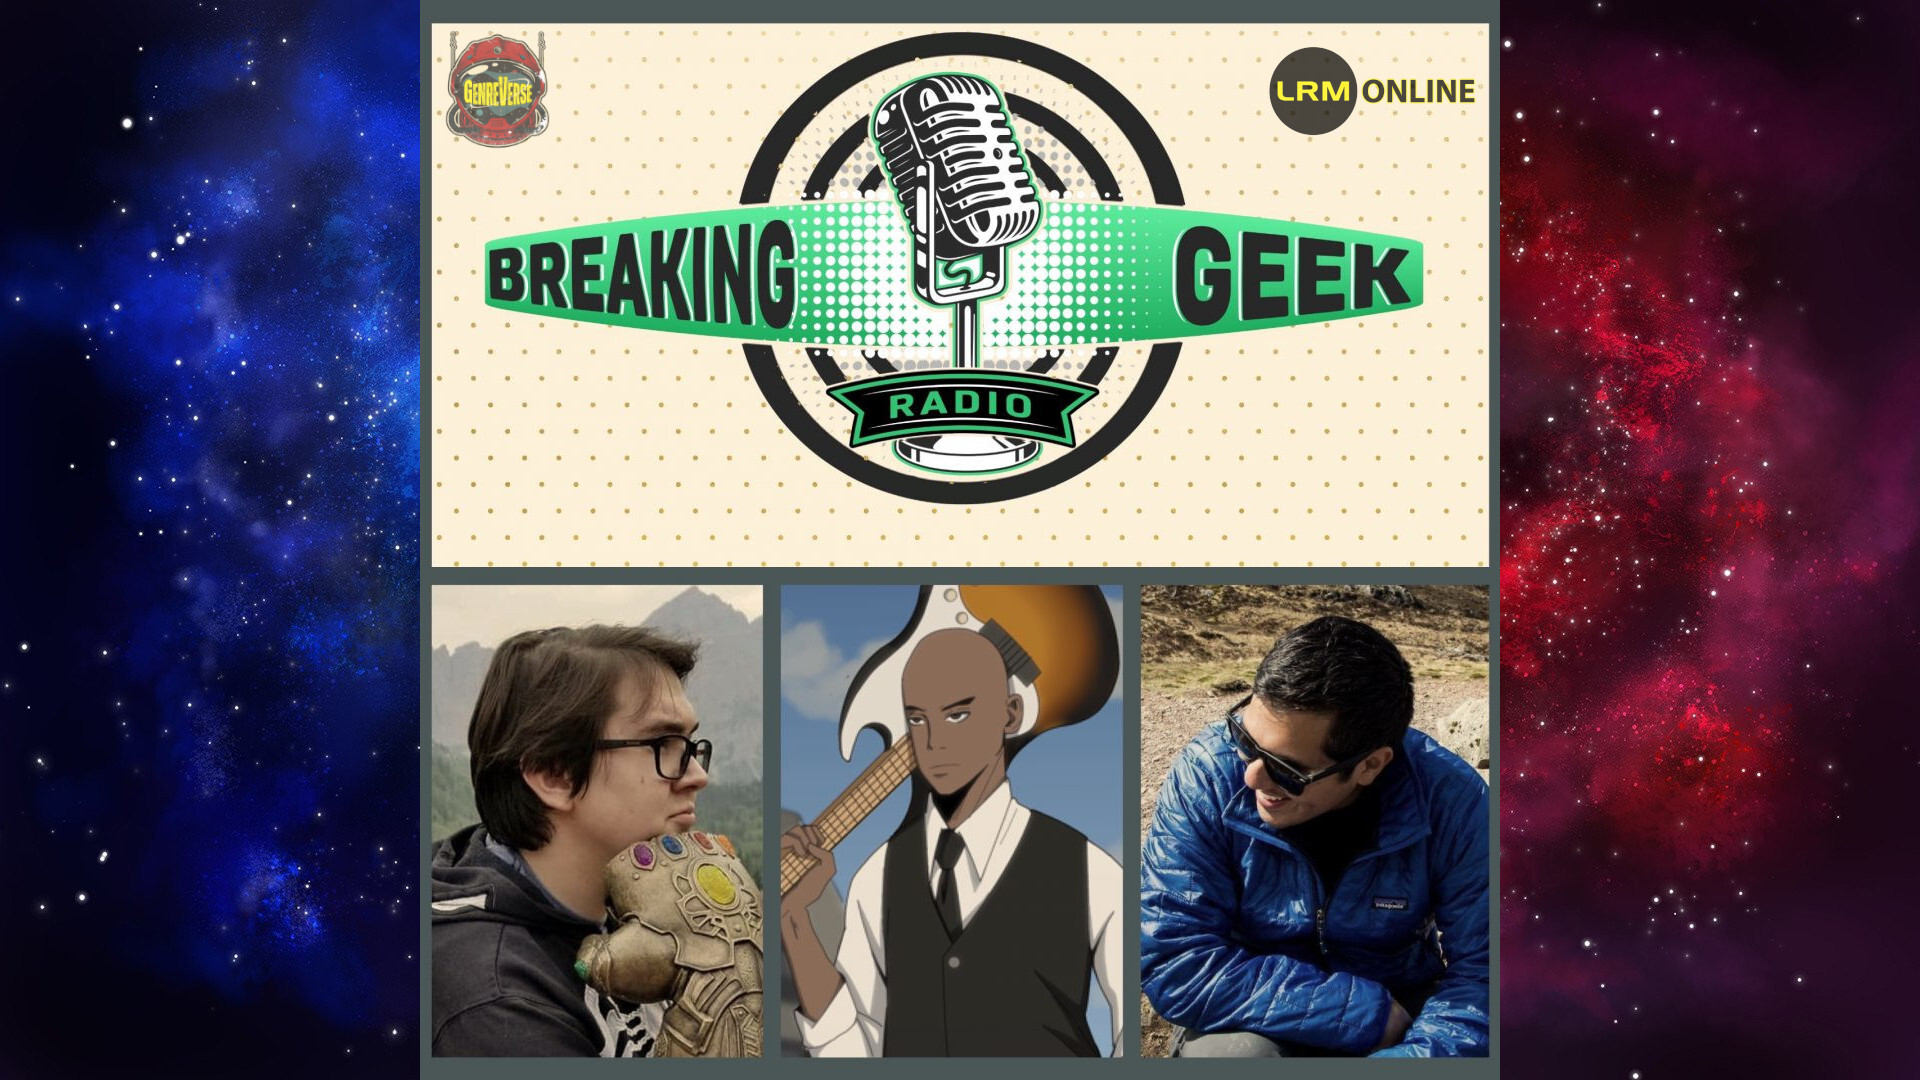 Superbowl Trailers Plus Uncharted And Peacemaker Review | Breaking Geek Radio: The Podcast